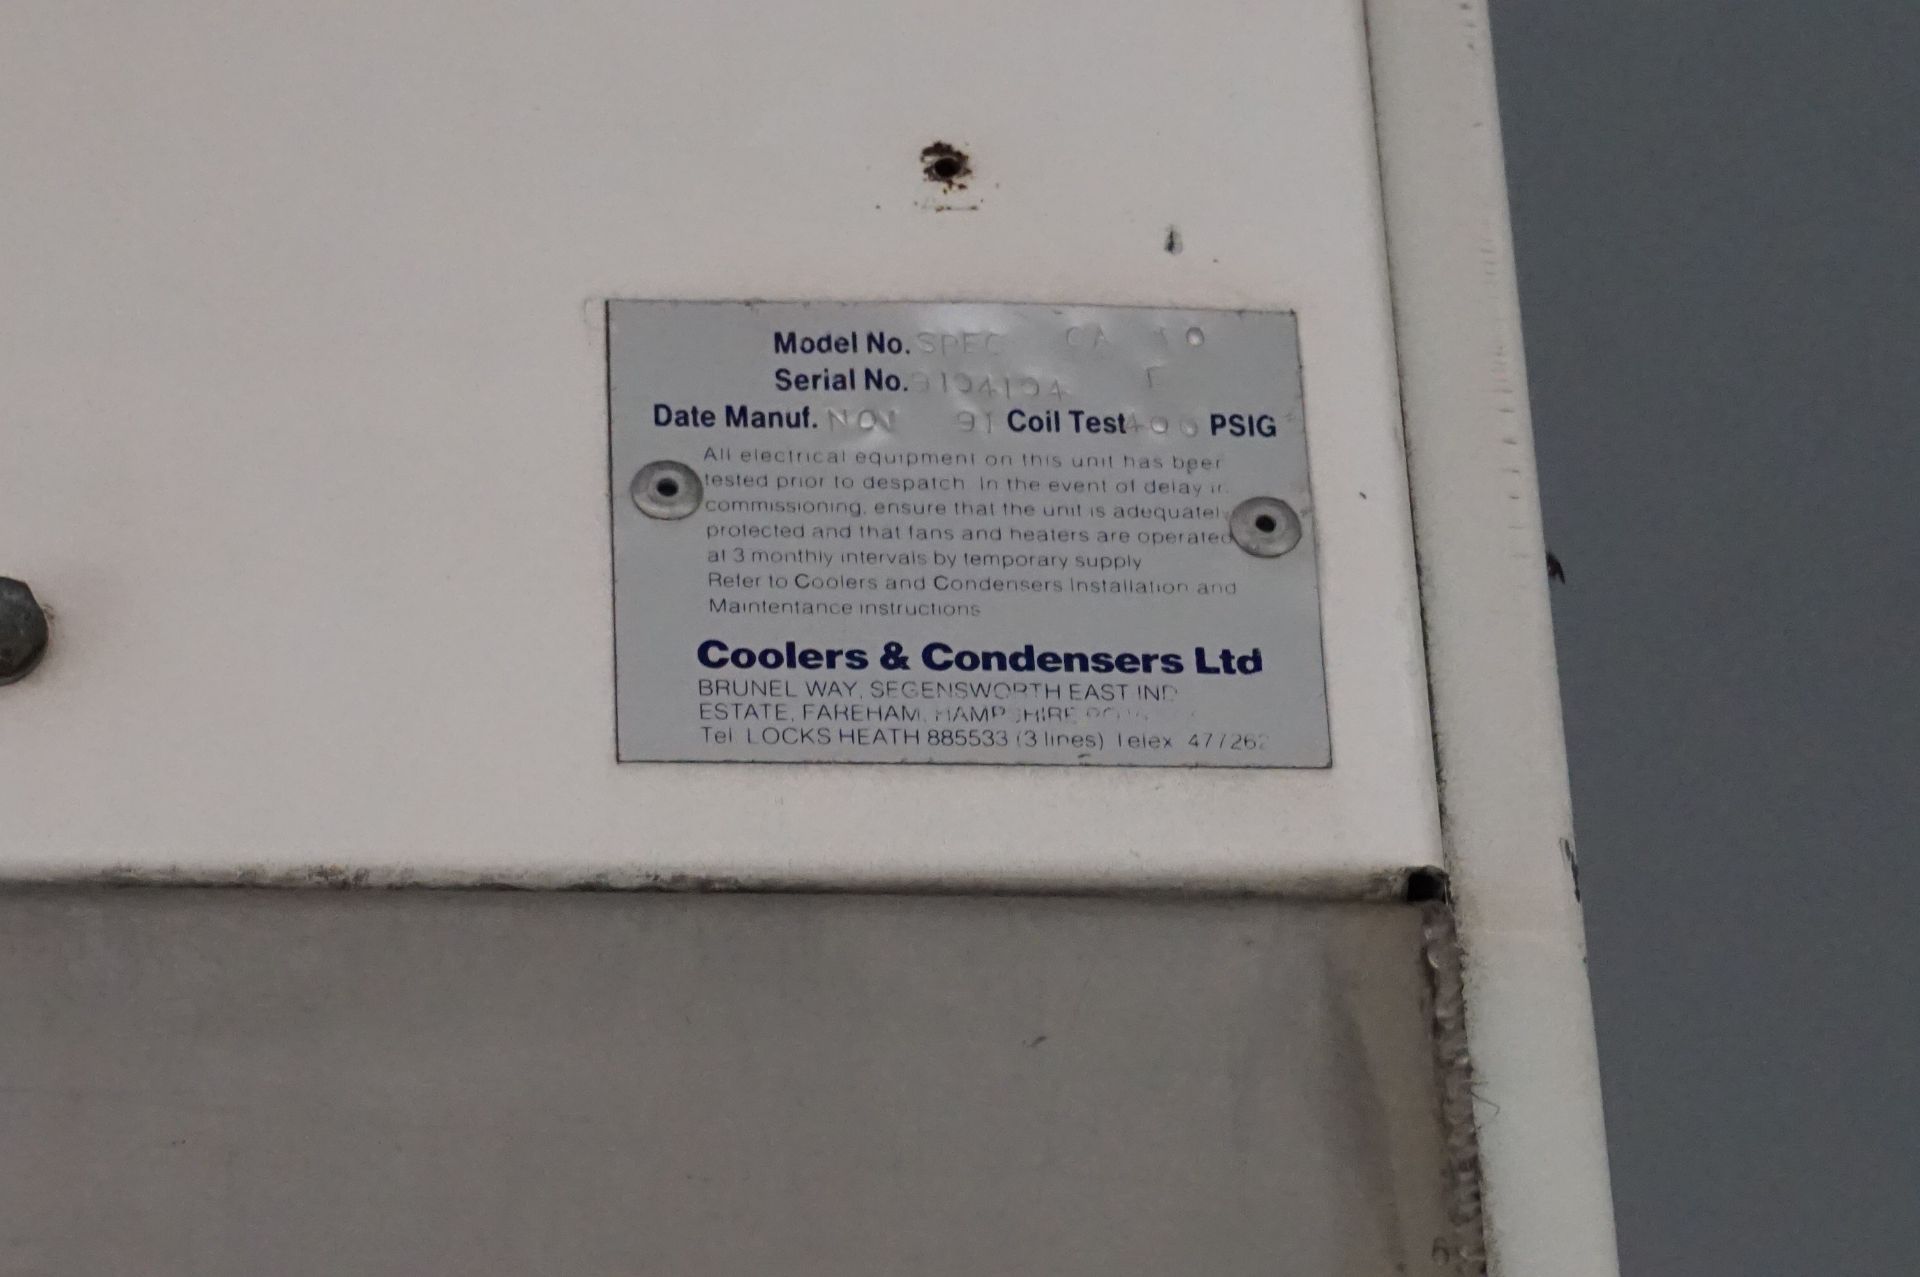 Coolers & Condensers, Model: CA10, twin fan chiller unit, Serial No. 9104104 (1991) (Lift out charge - Image 2 of 2